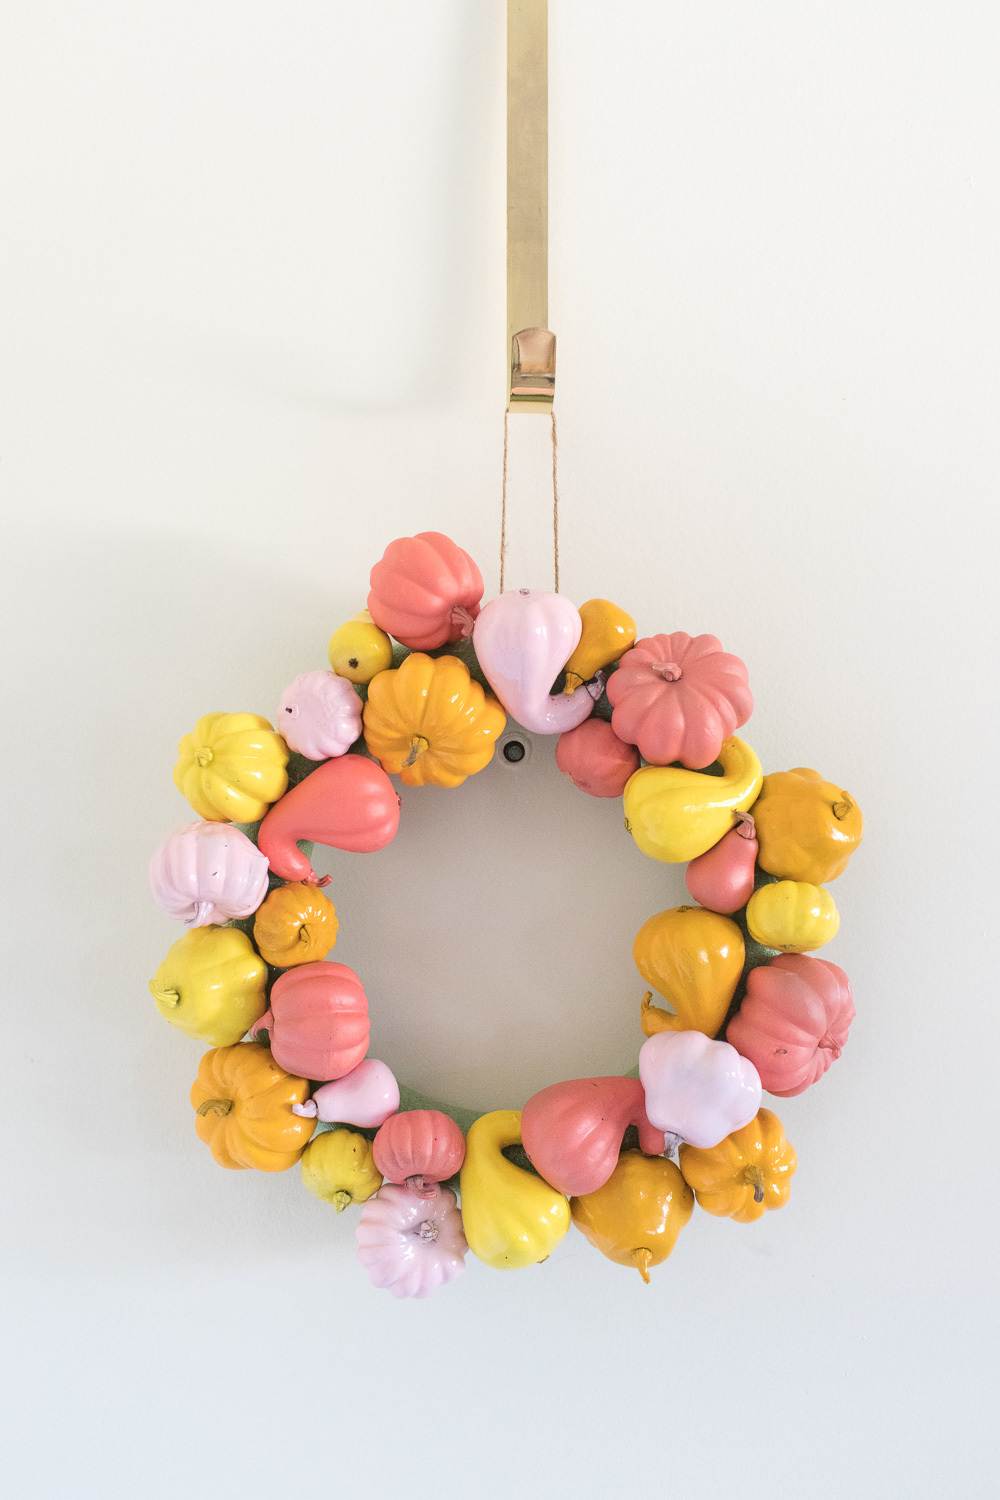 A wreath is made out of small pumpkins and gourds that have been painted yellow, orange and pink.